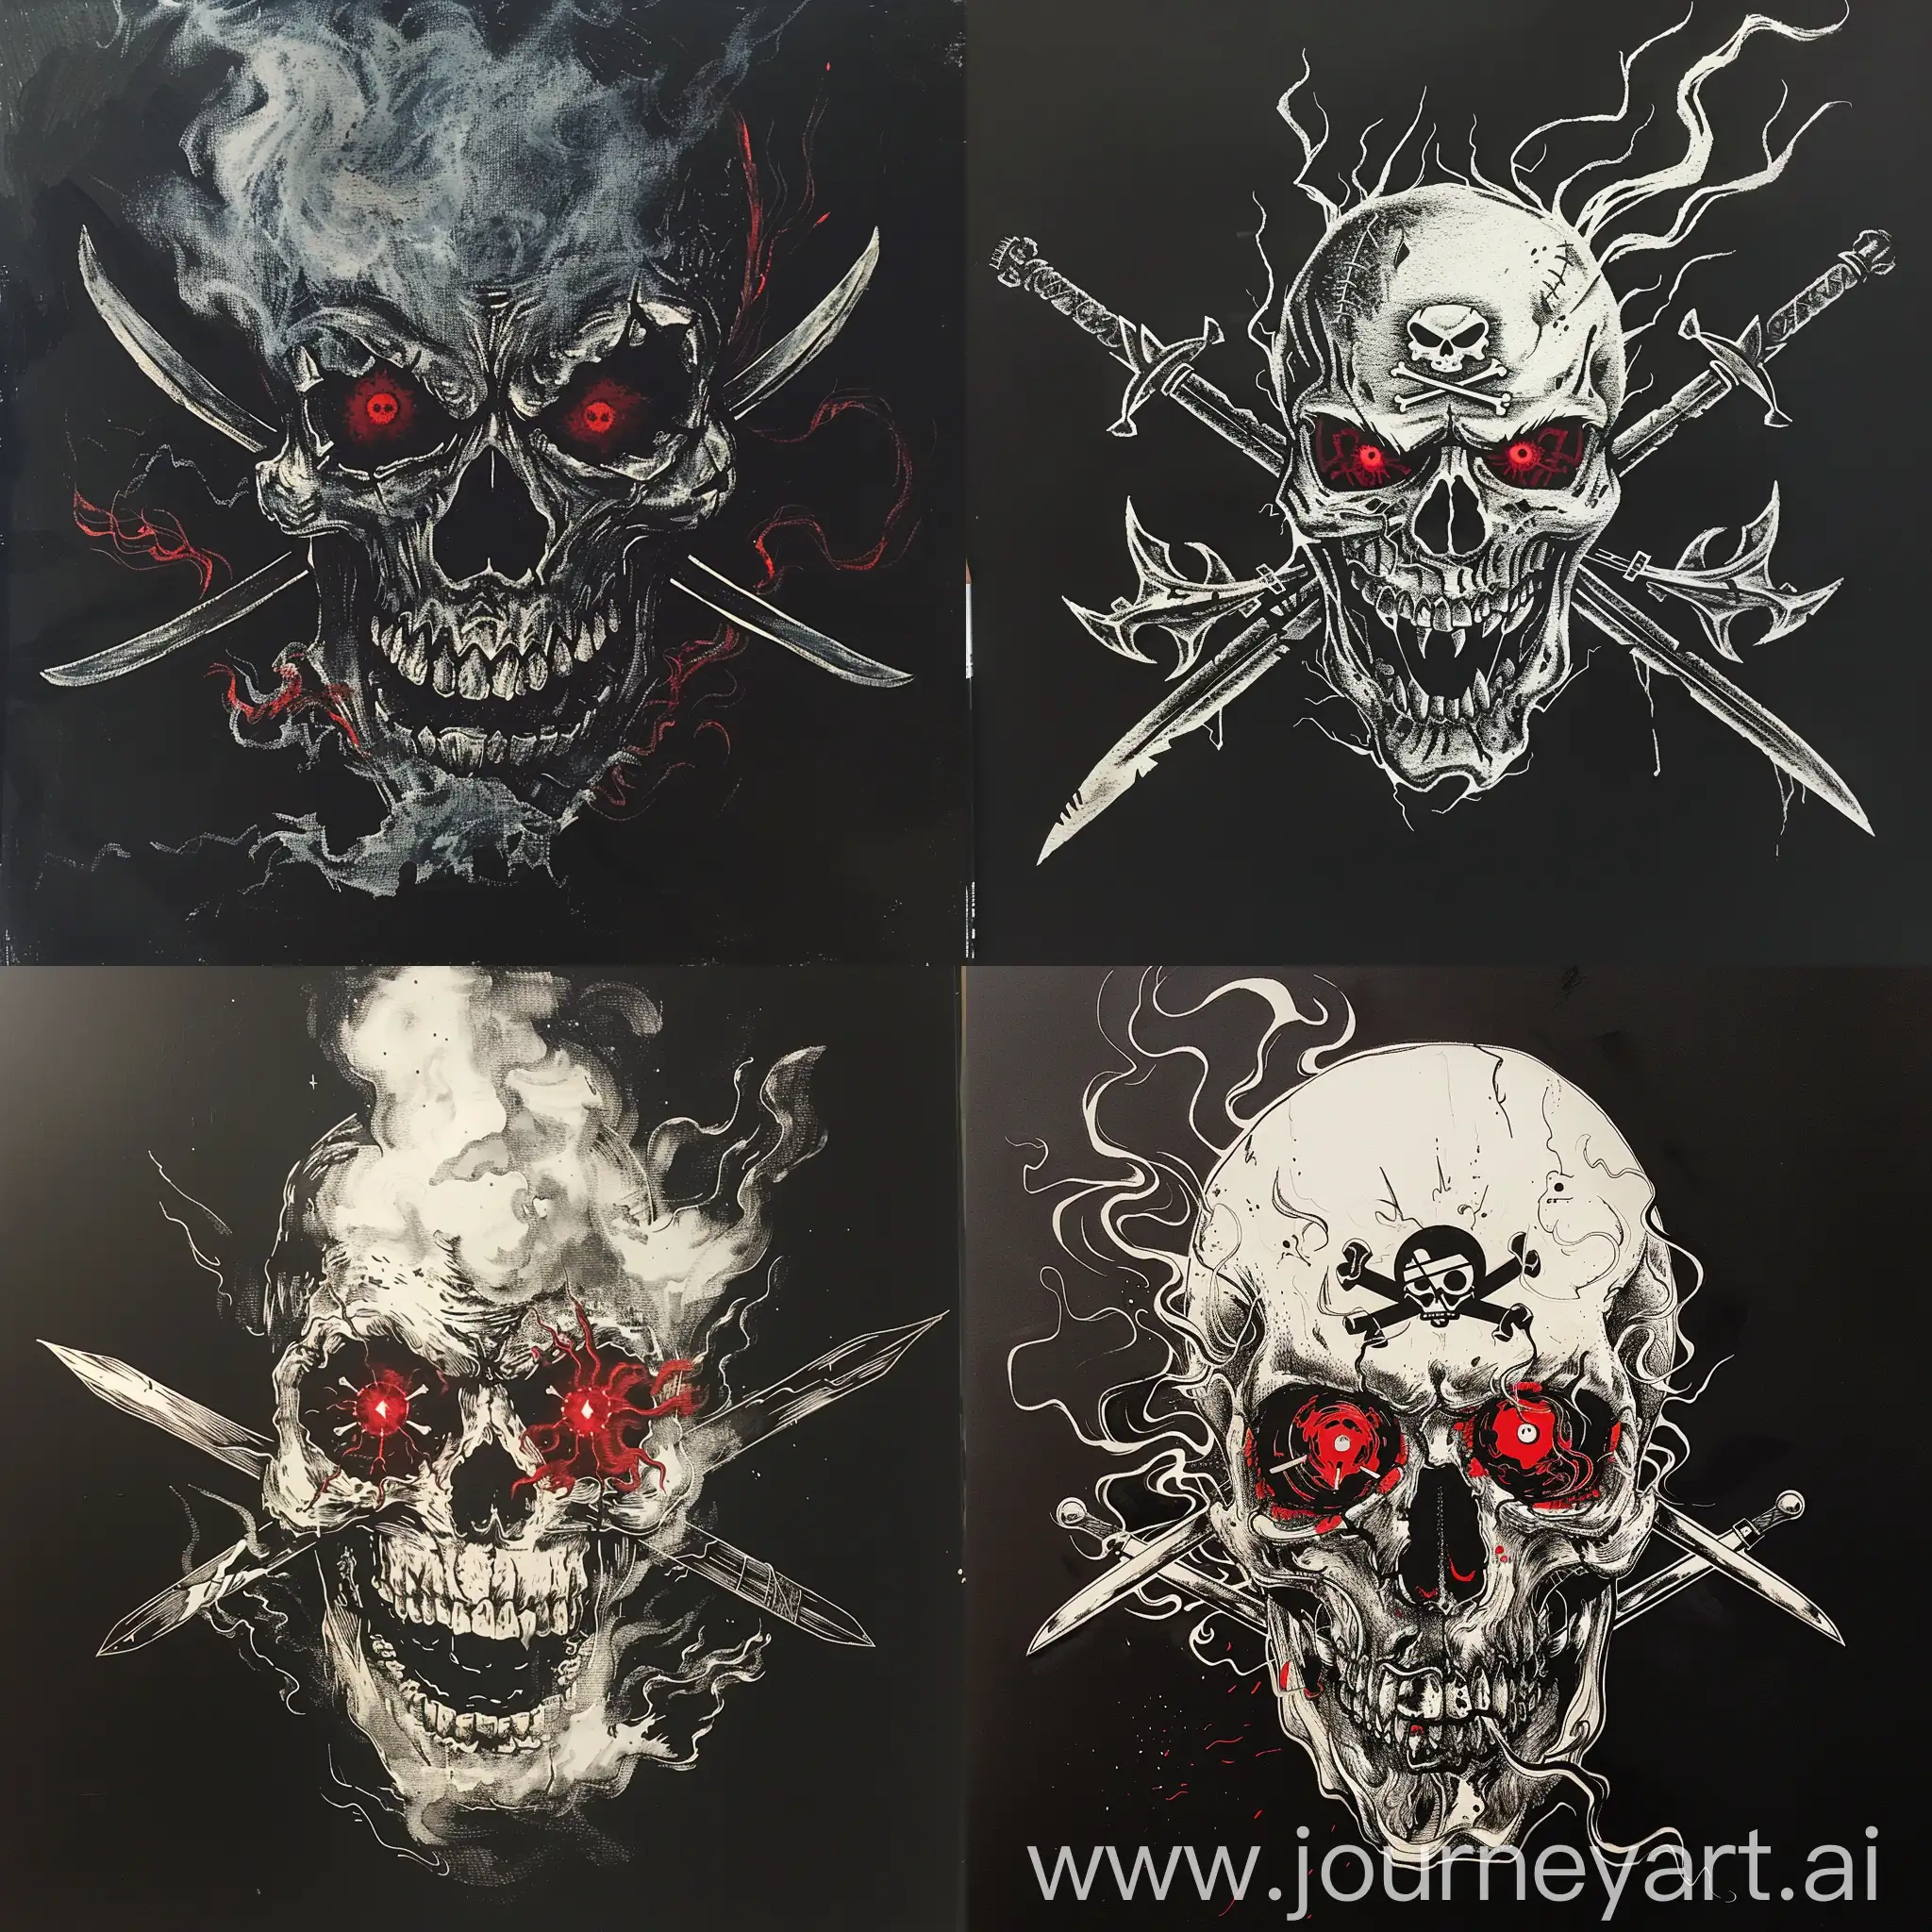 Sinister-Skull-with-Red-Glowing-Eyes-and-Smoking-Swords-on-Black-Background